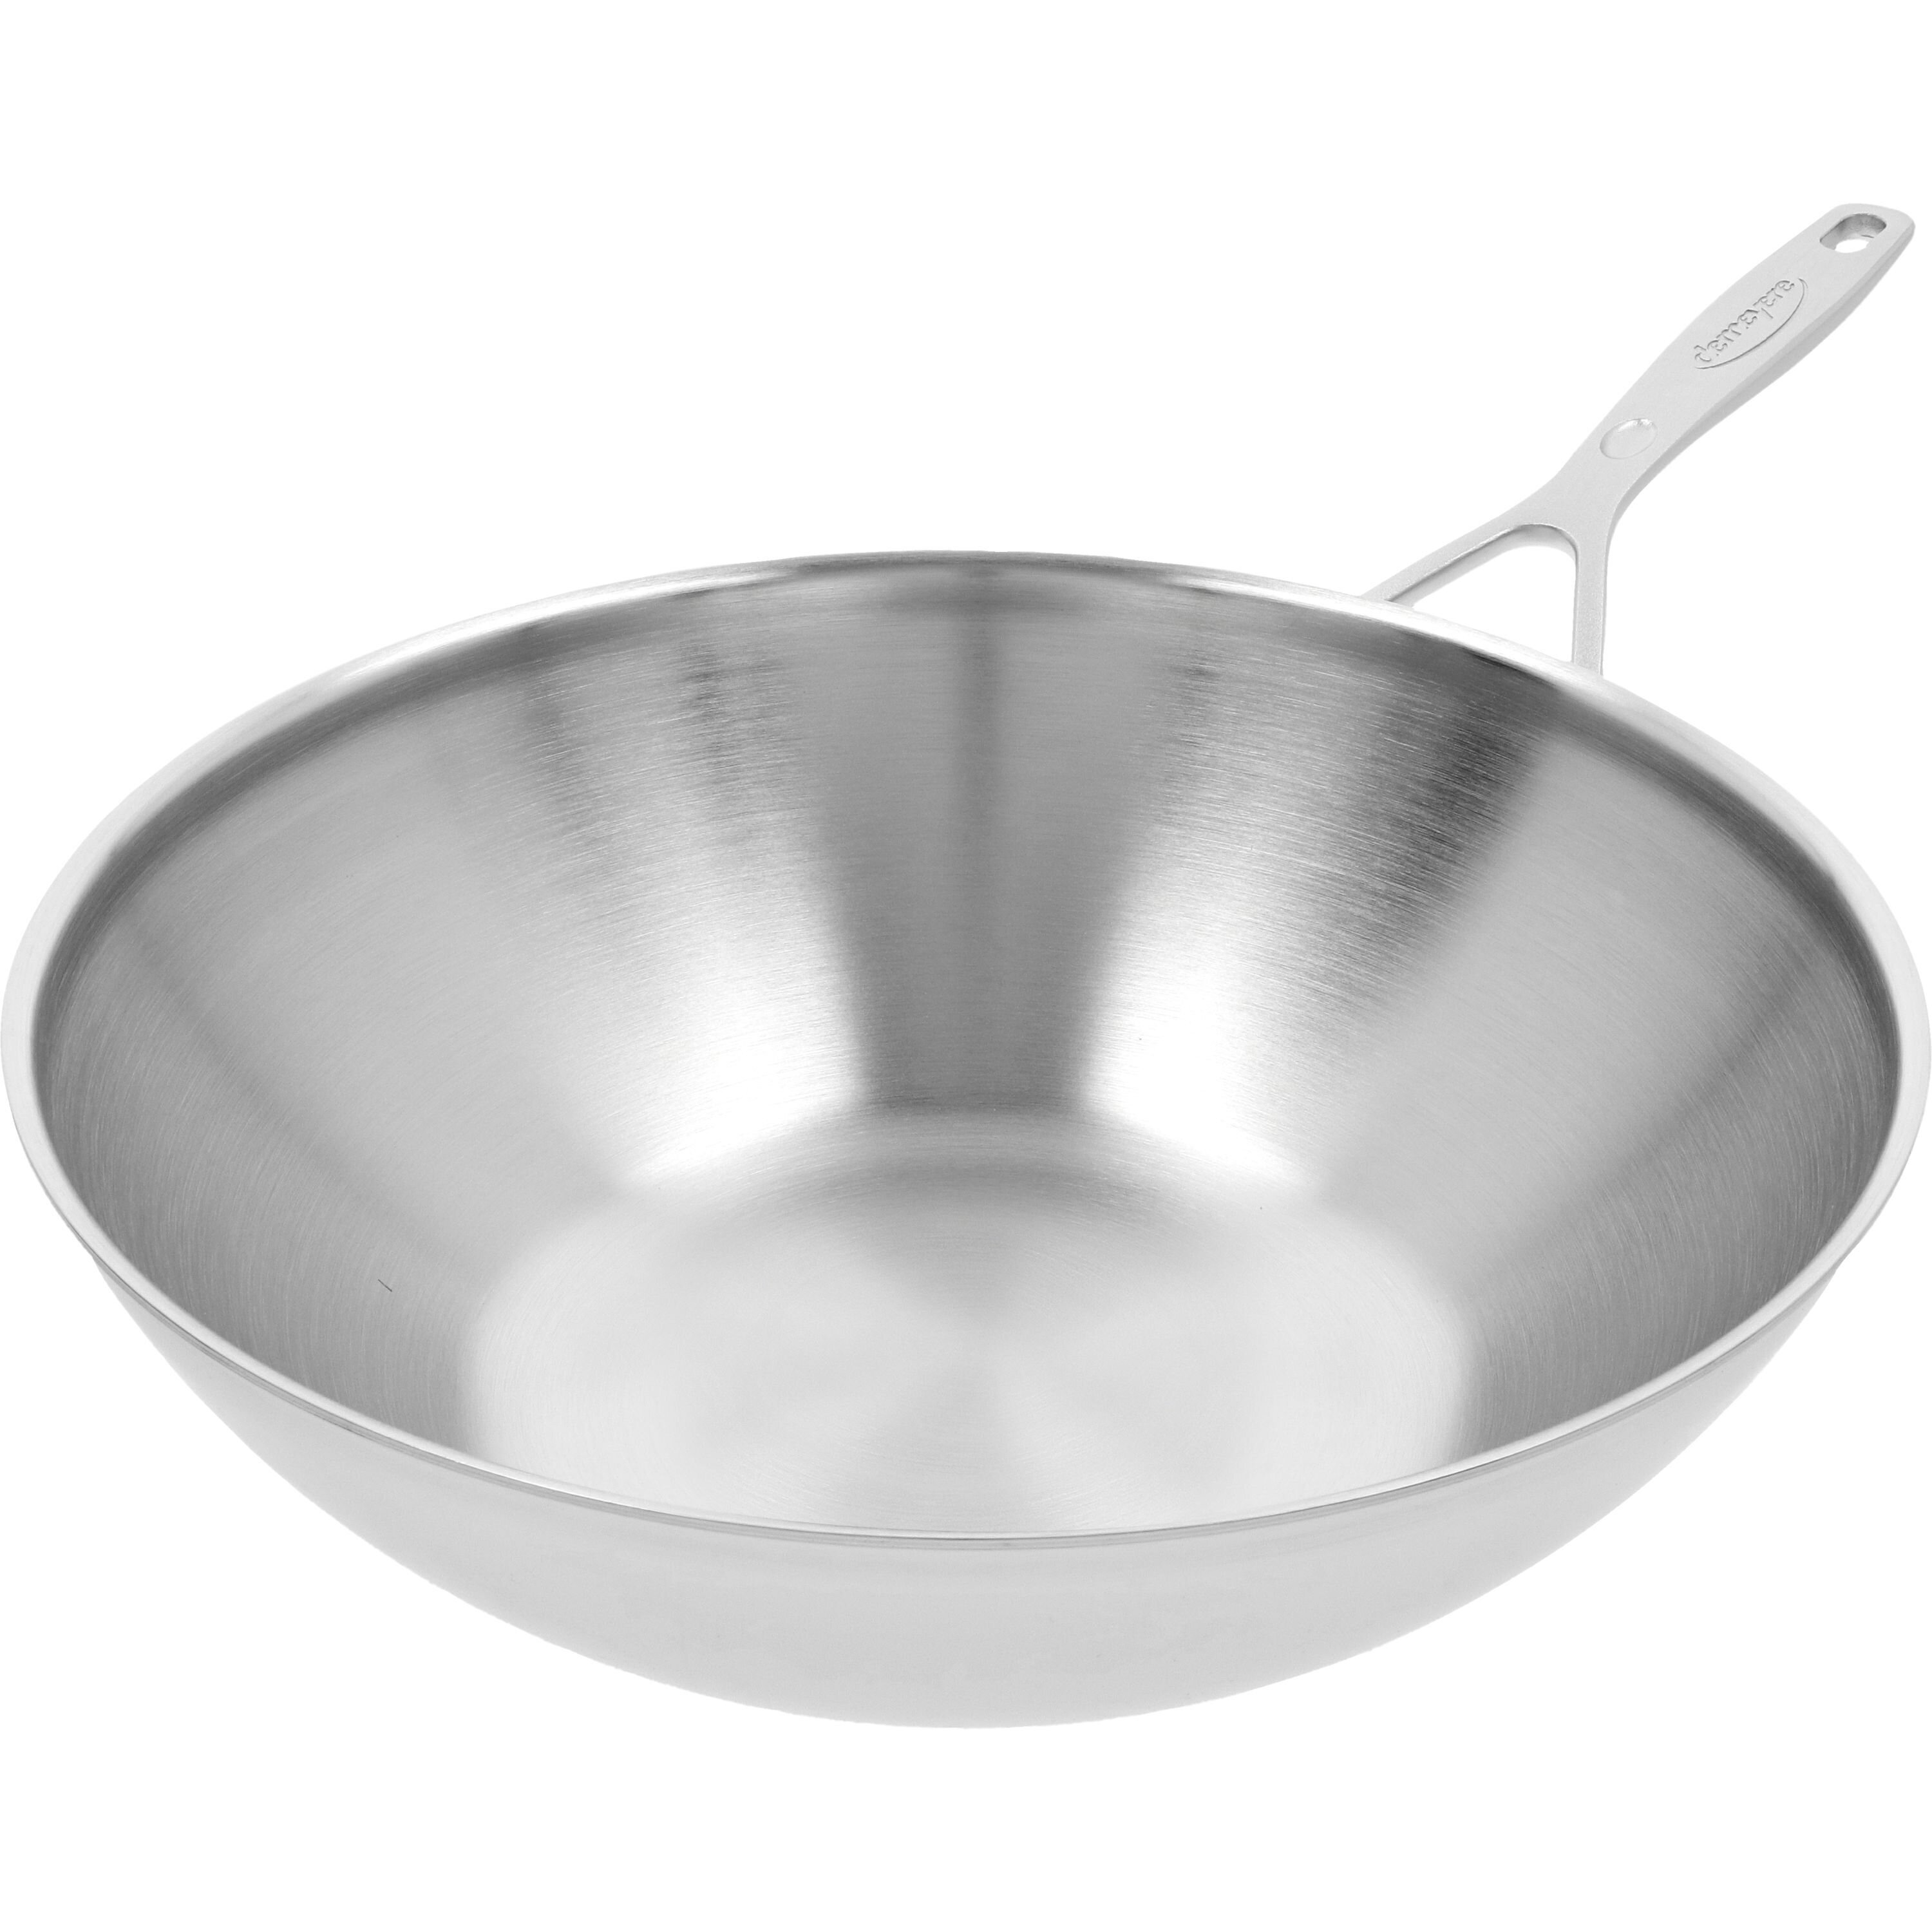 KitchenAid 5-Ply Clad 15-in Stainless Steel Wok